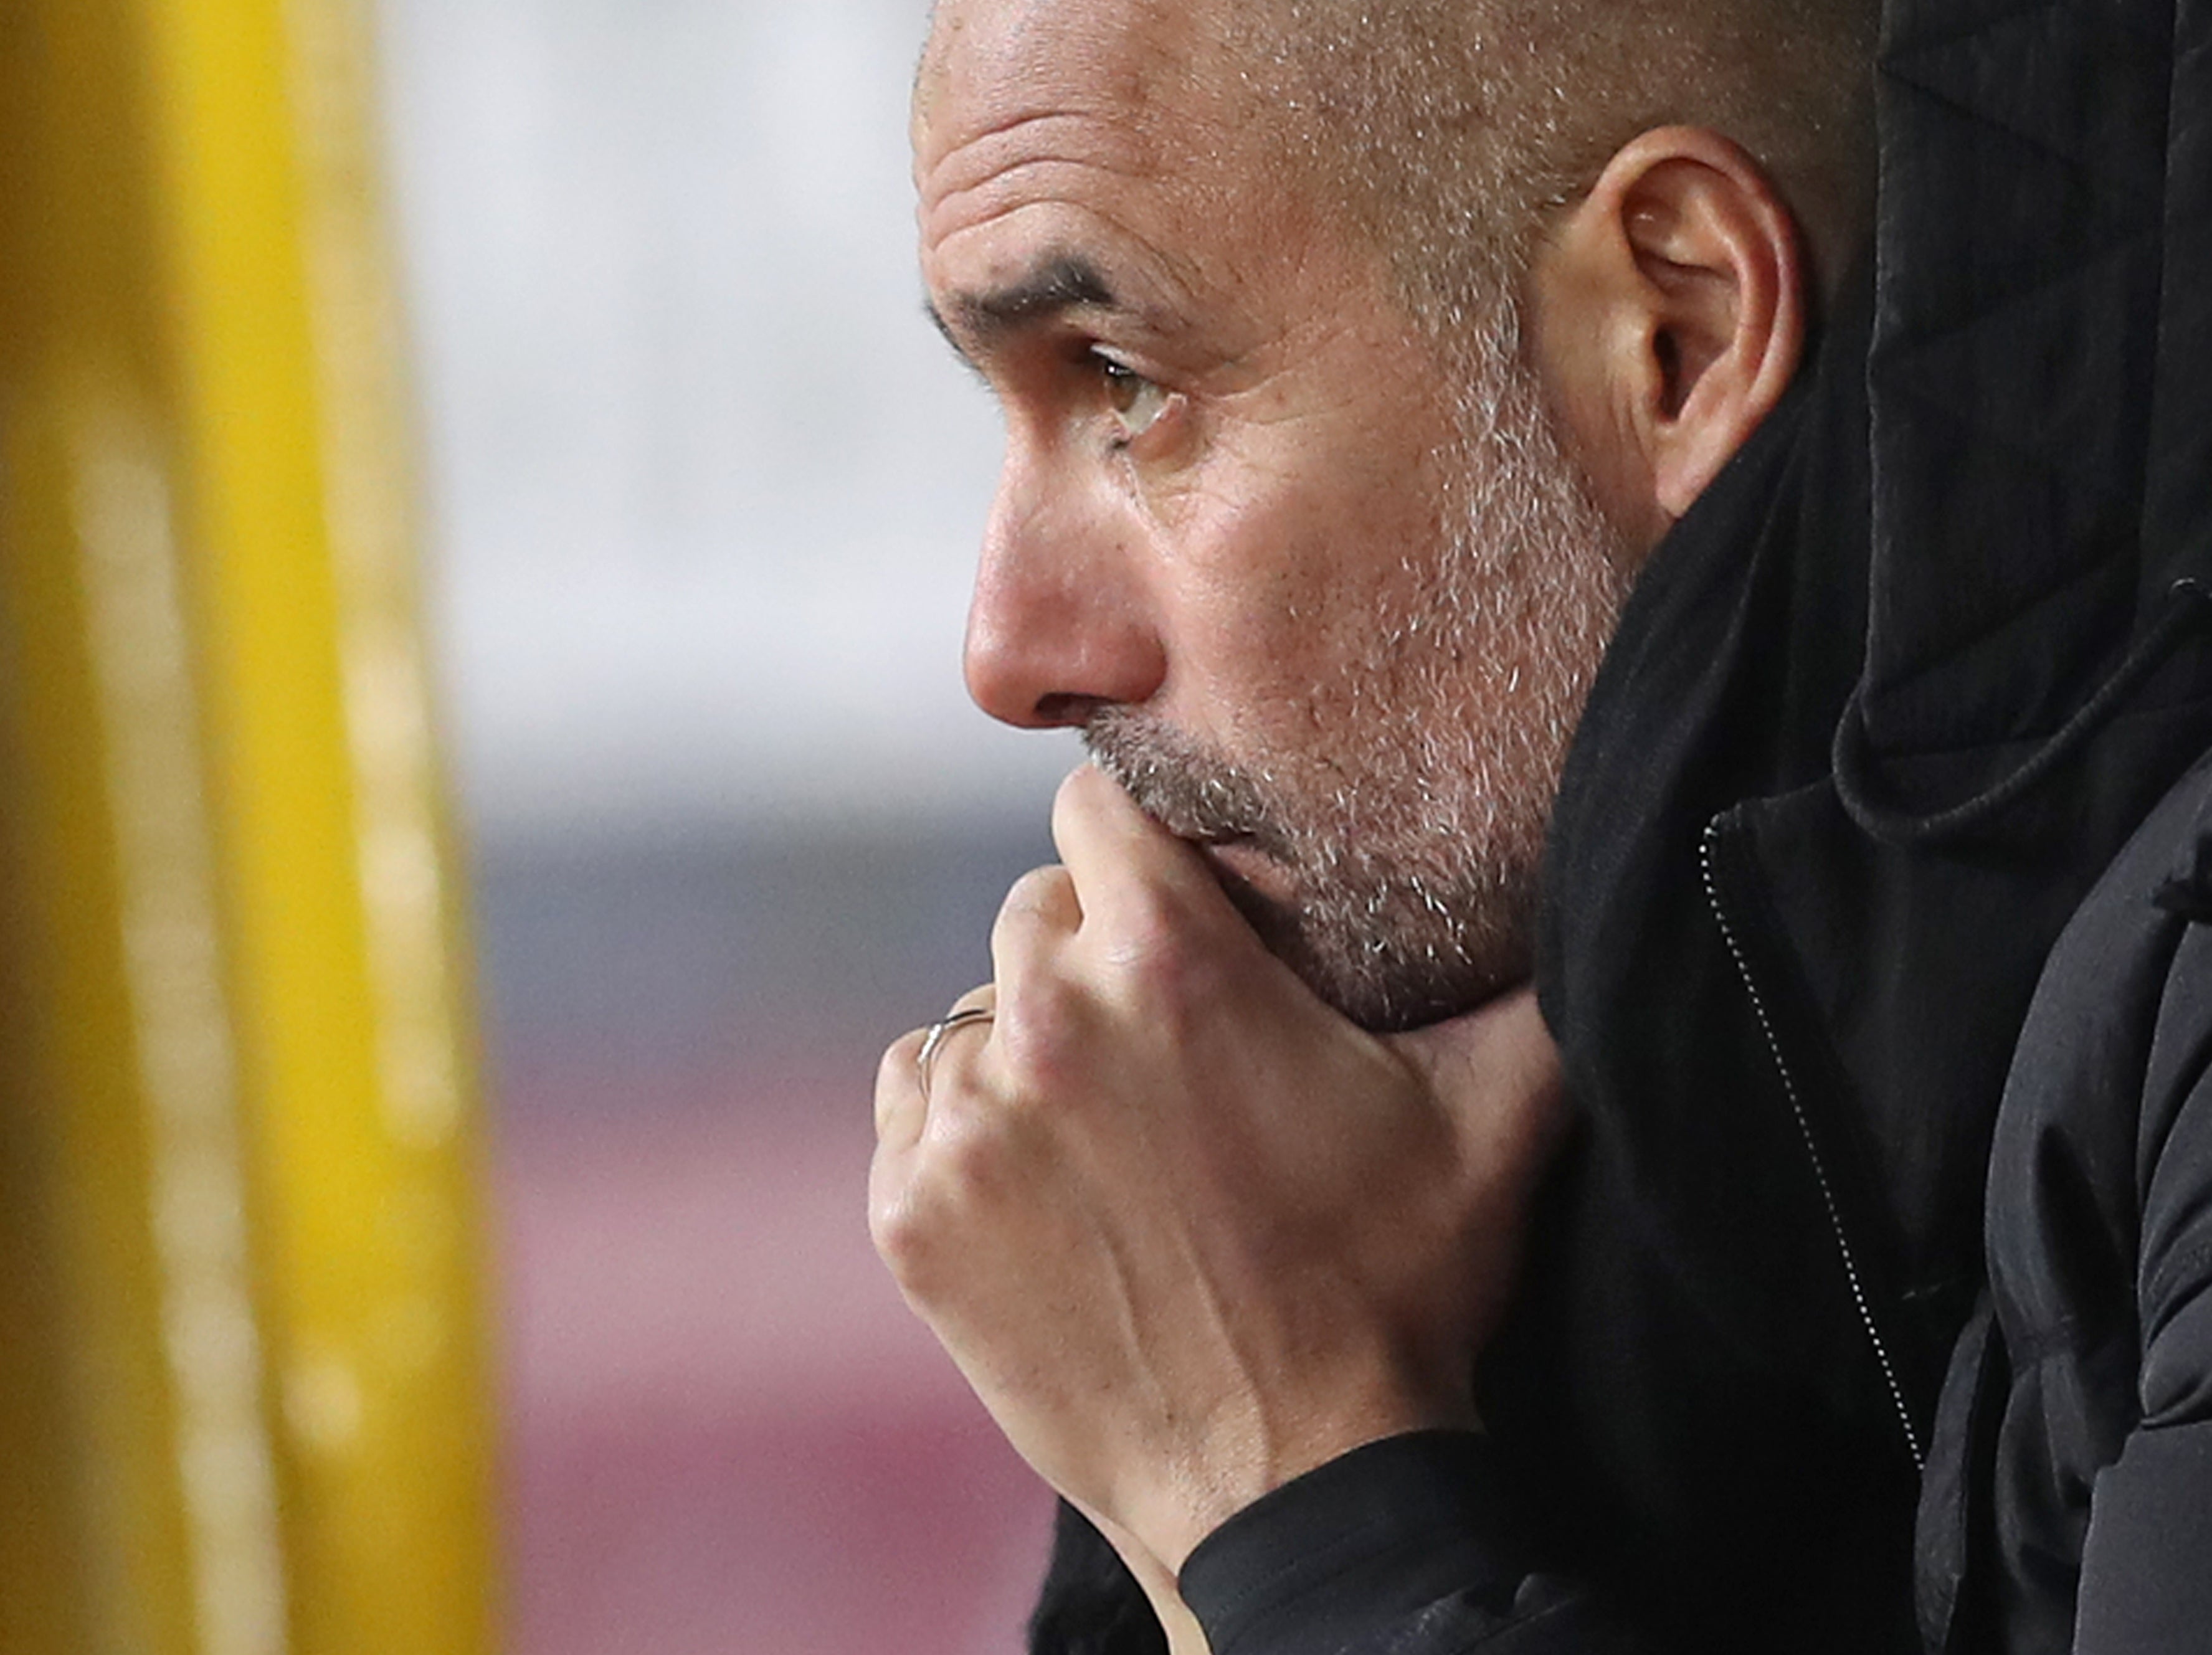 Guardiola has tweaked his philosophy and it's paying dividends